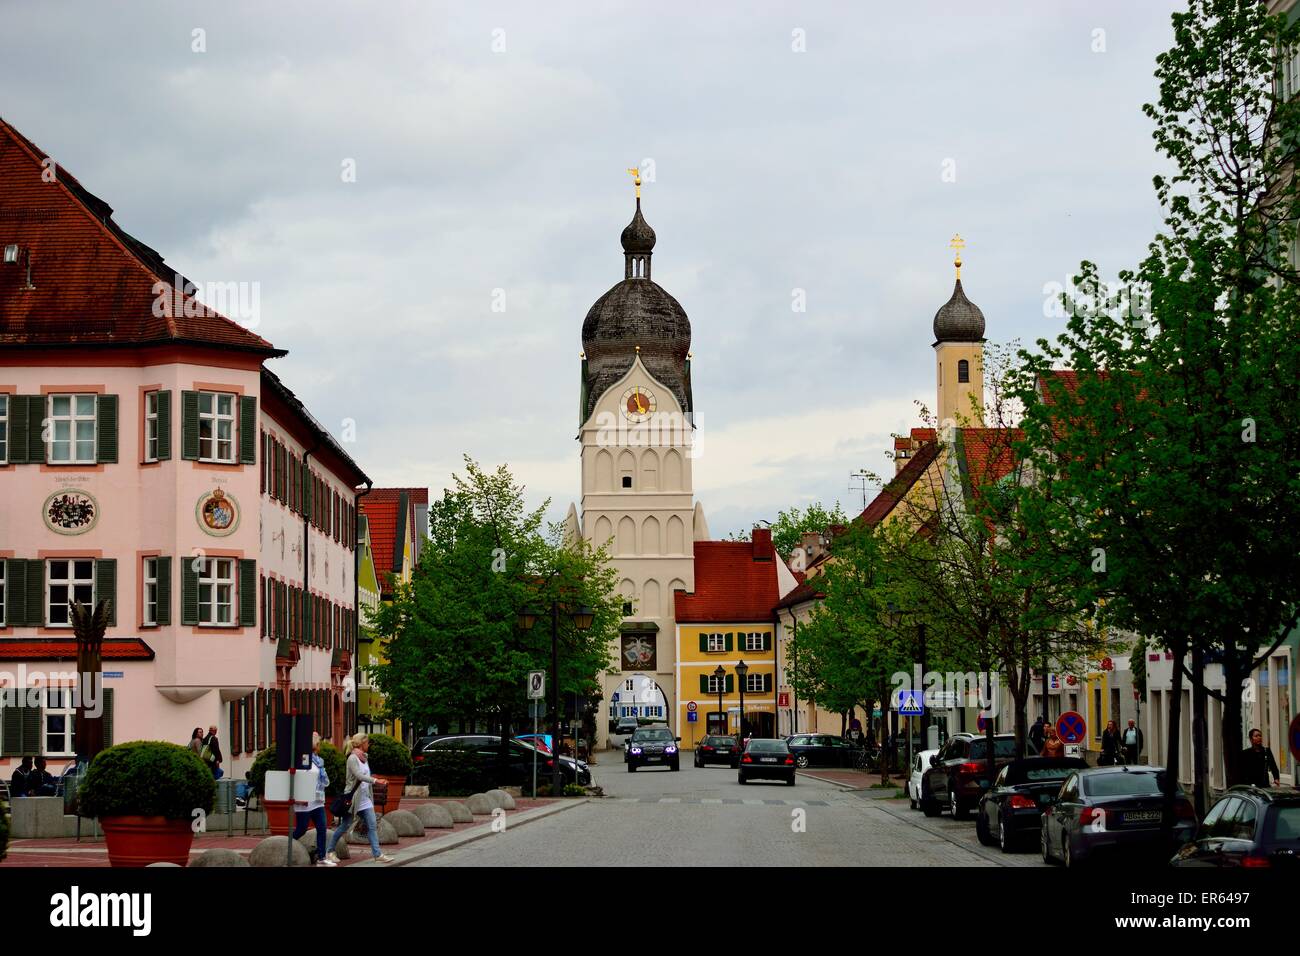 View from the city center of Erding Germany Stock Photo